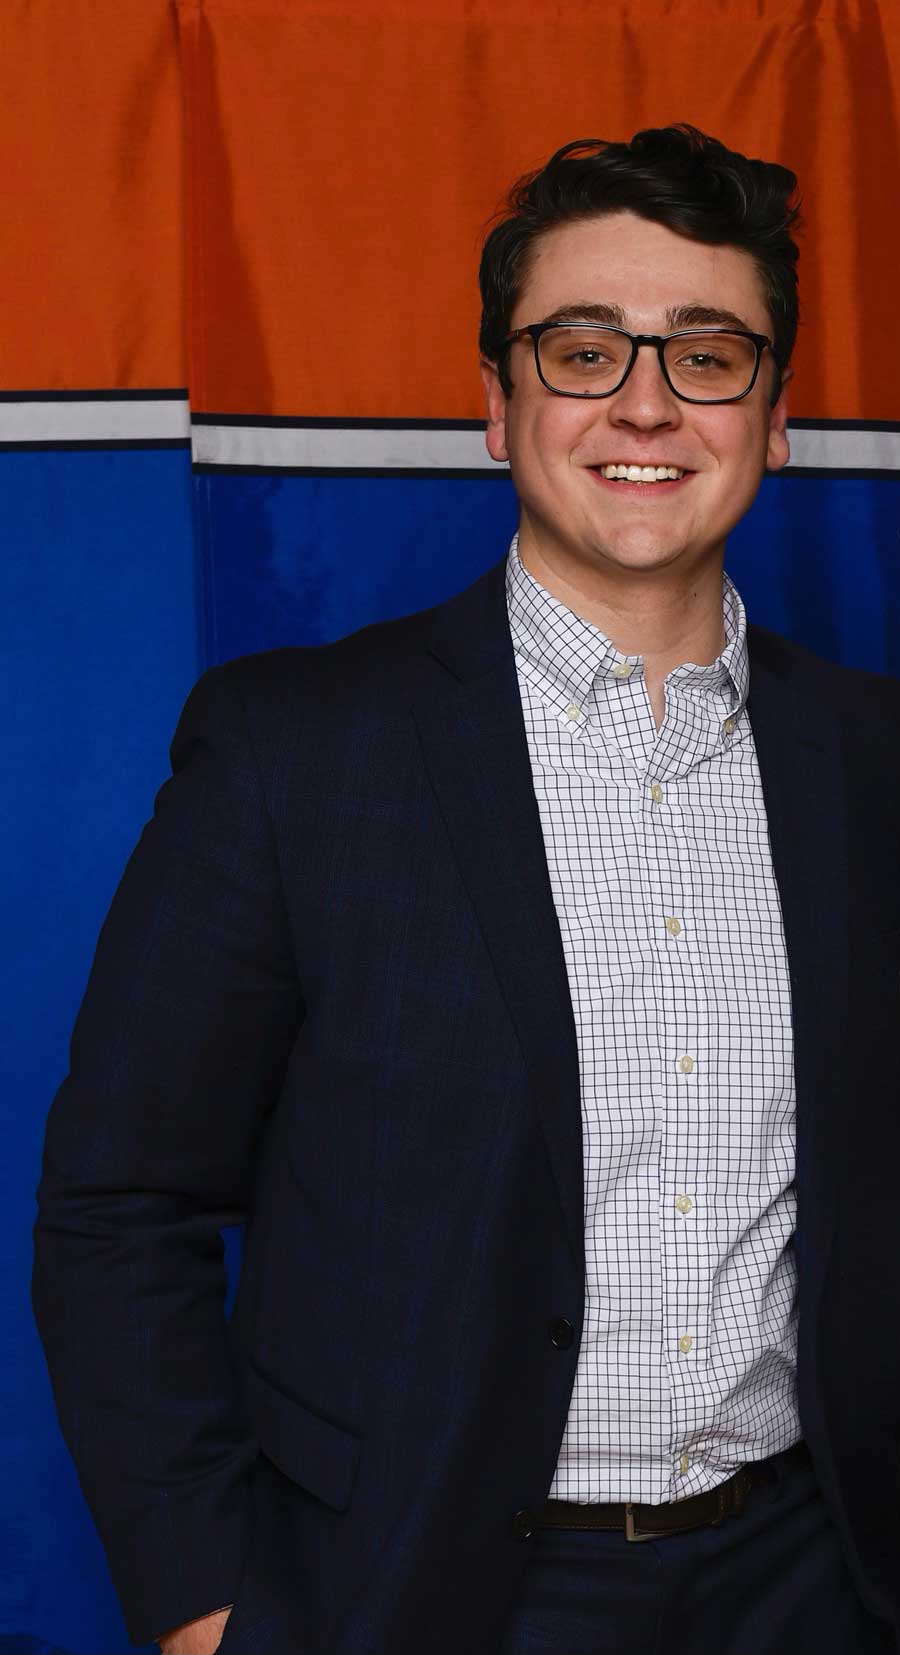 Colin Hetherington in a suit in front of a blue and orange banner